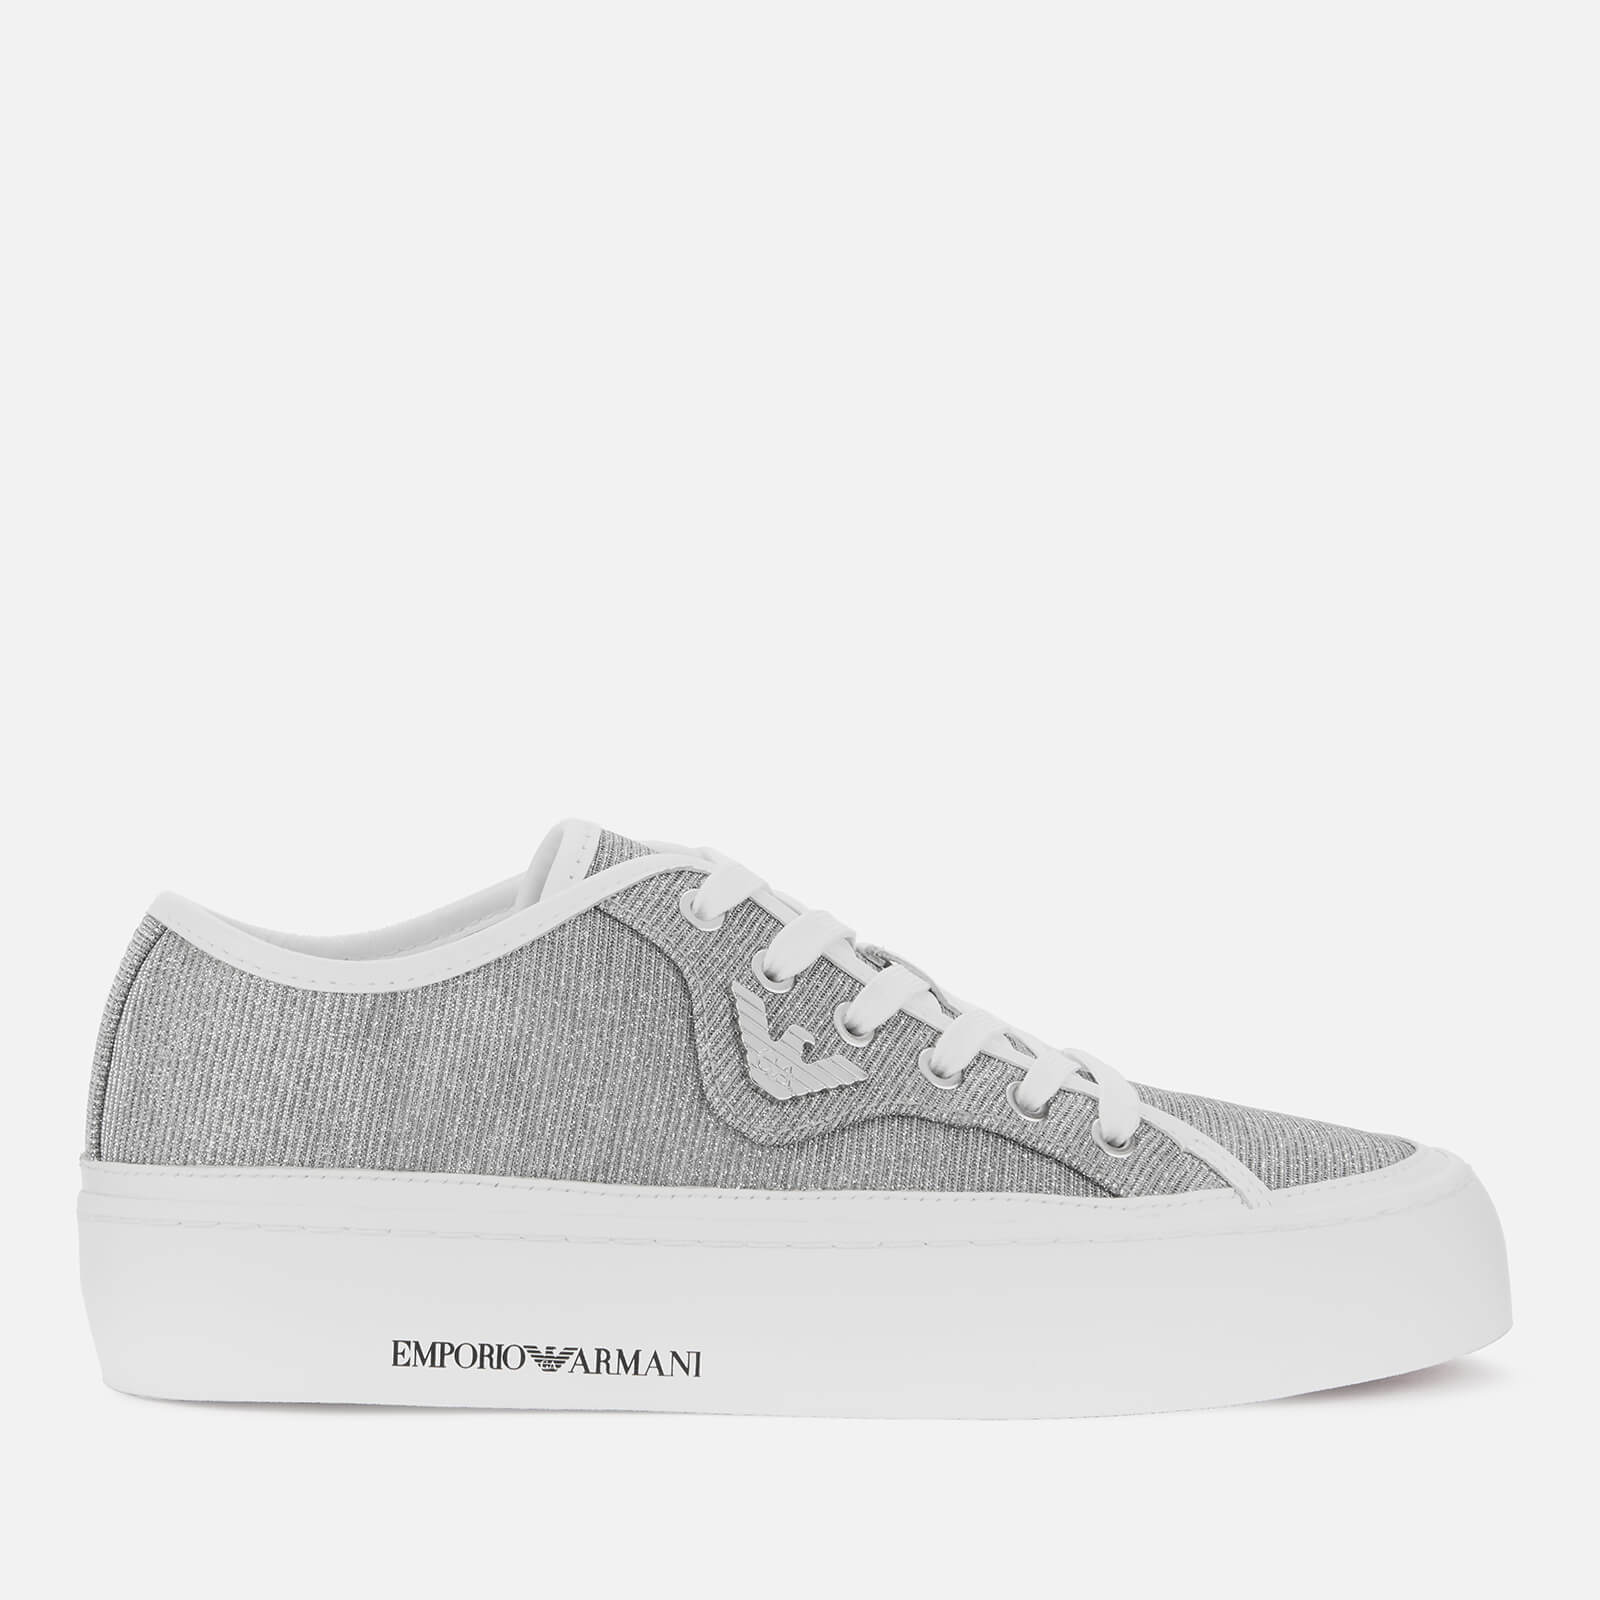 armani sparkly trainers - 60% OFF 